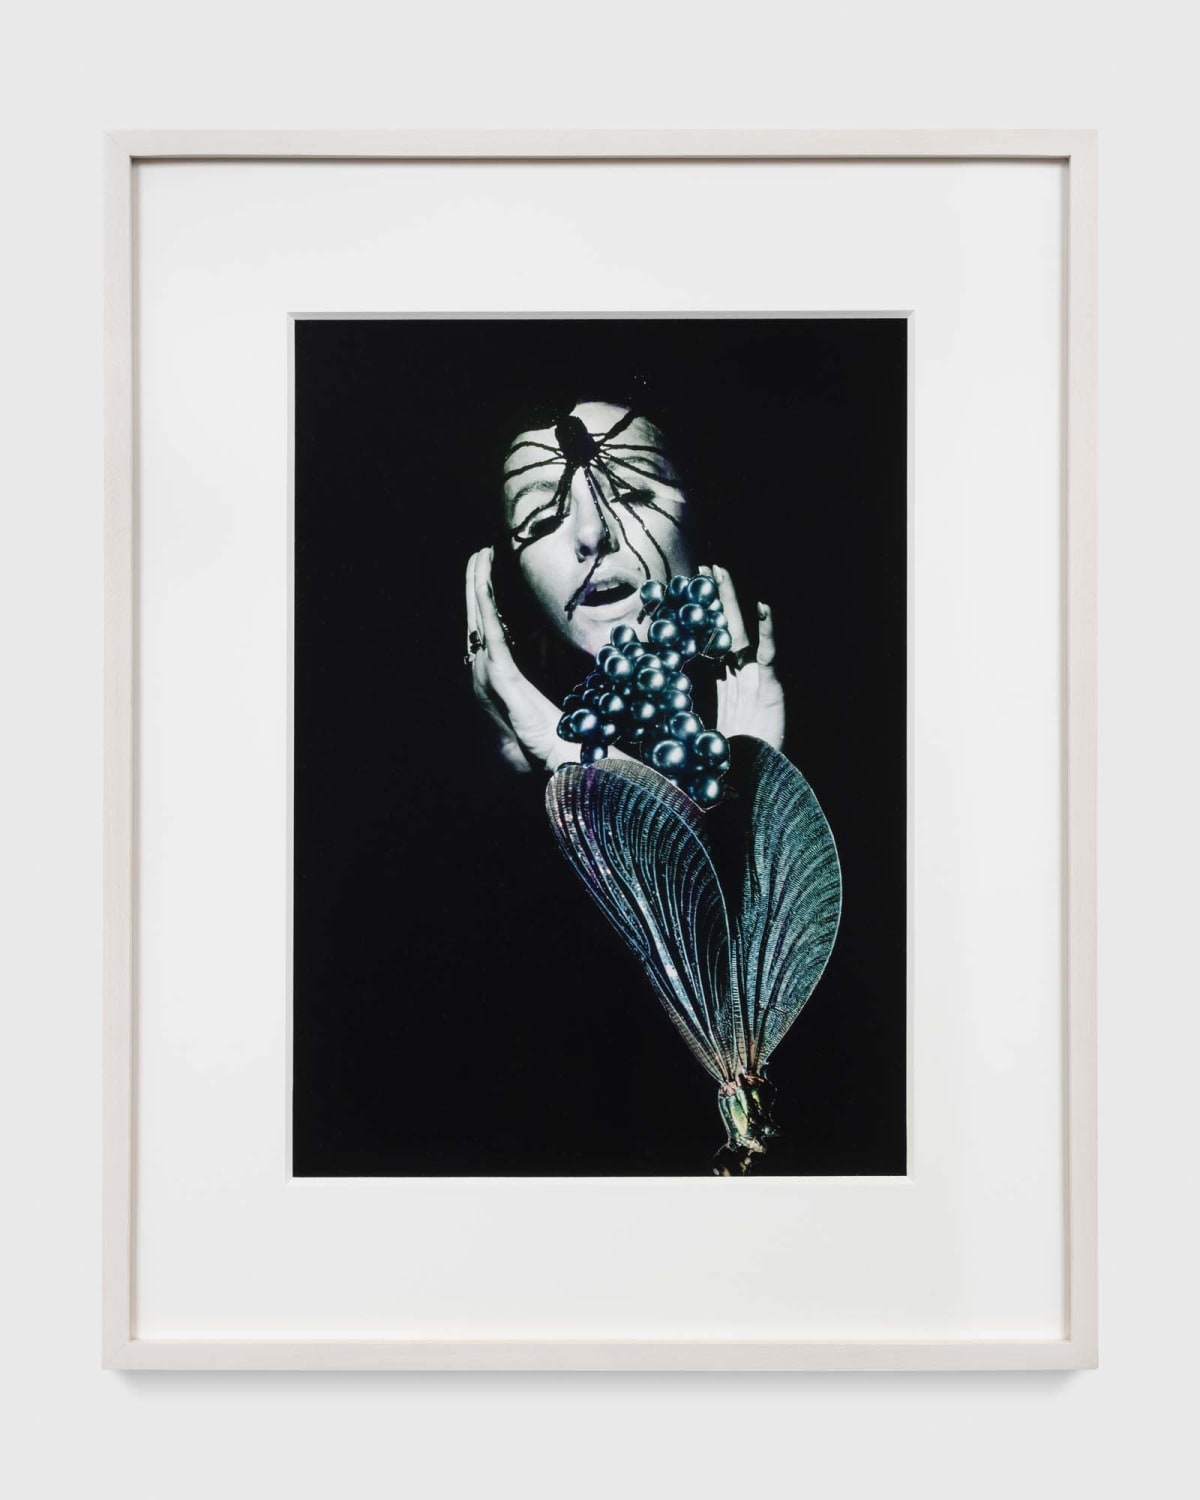 Penny Slinger, Whipping Girl (1970-1977), Available for Sale